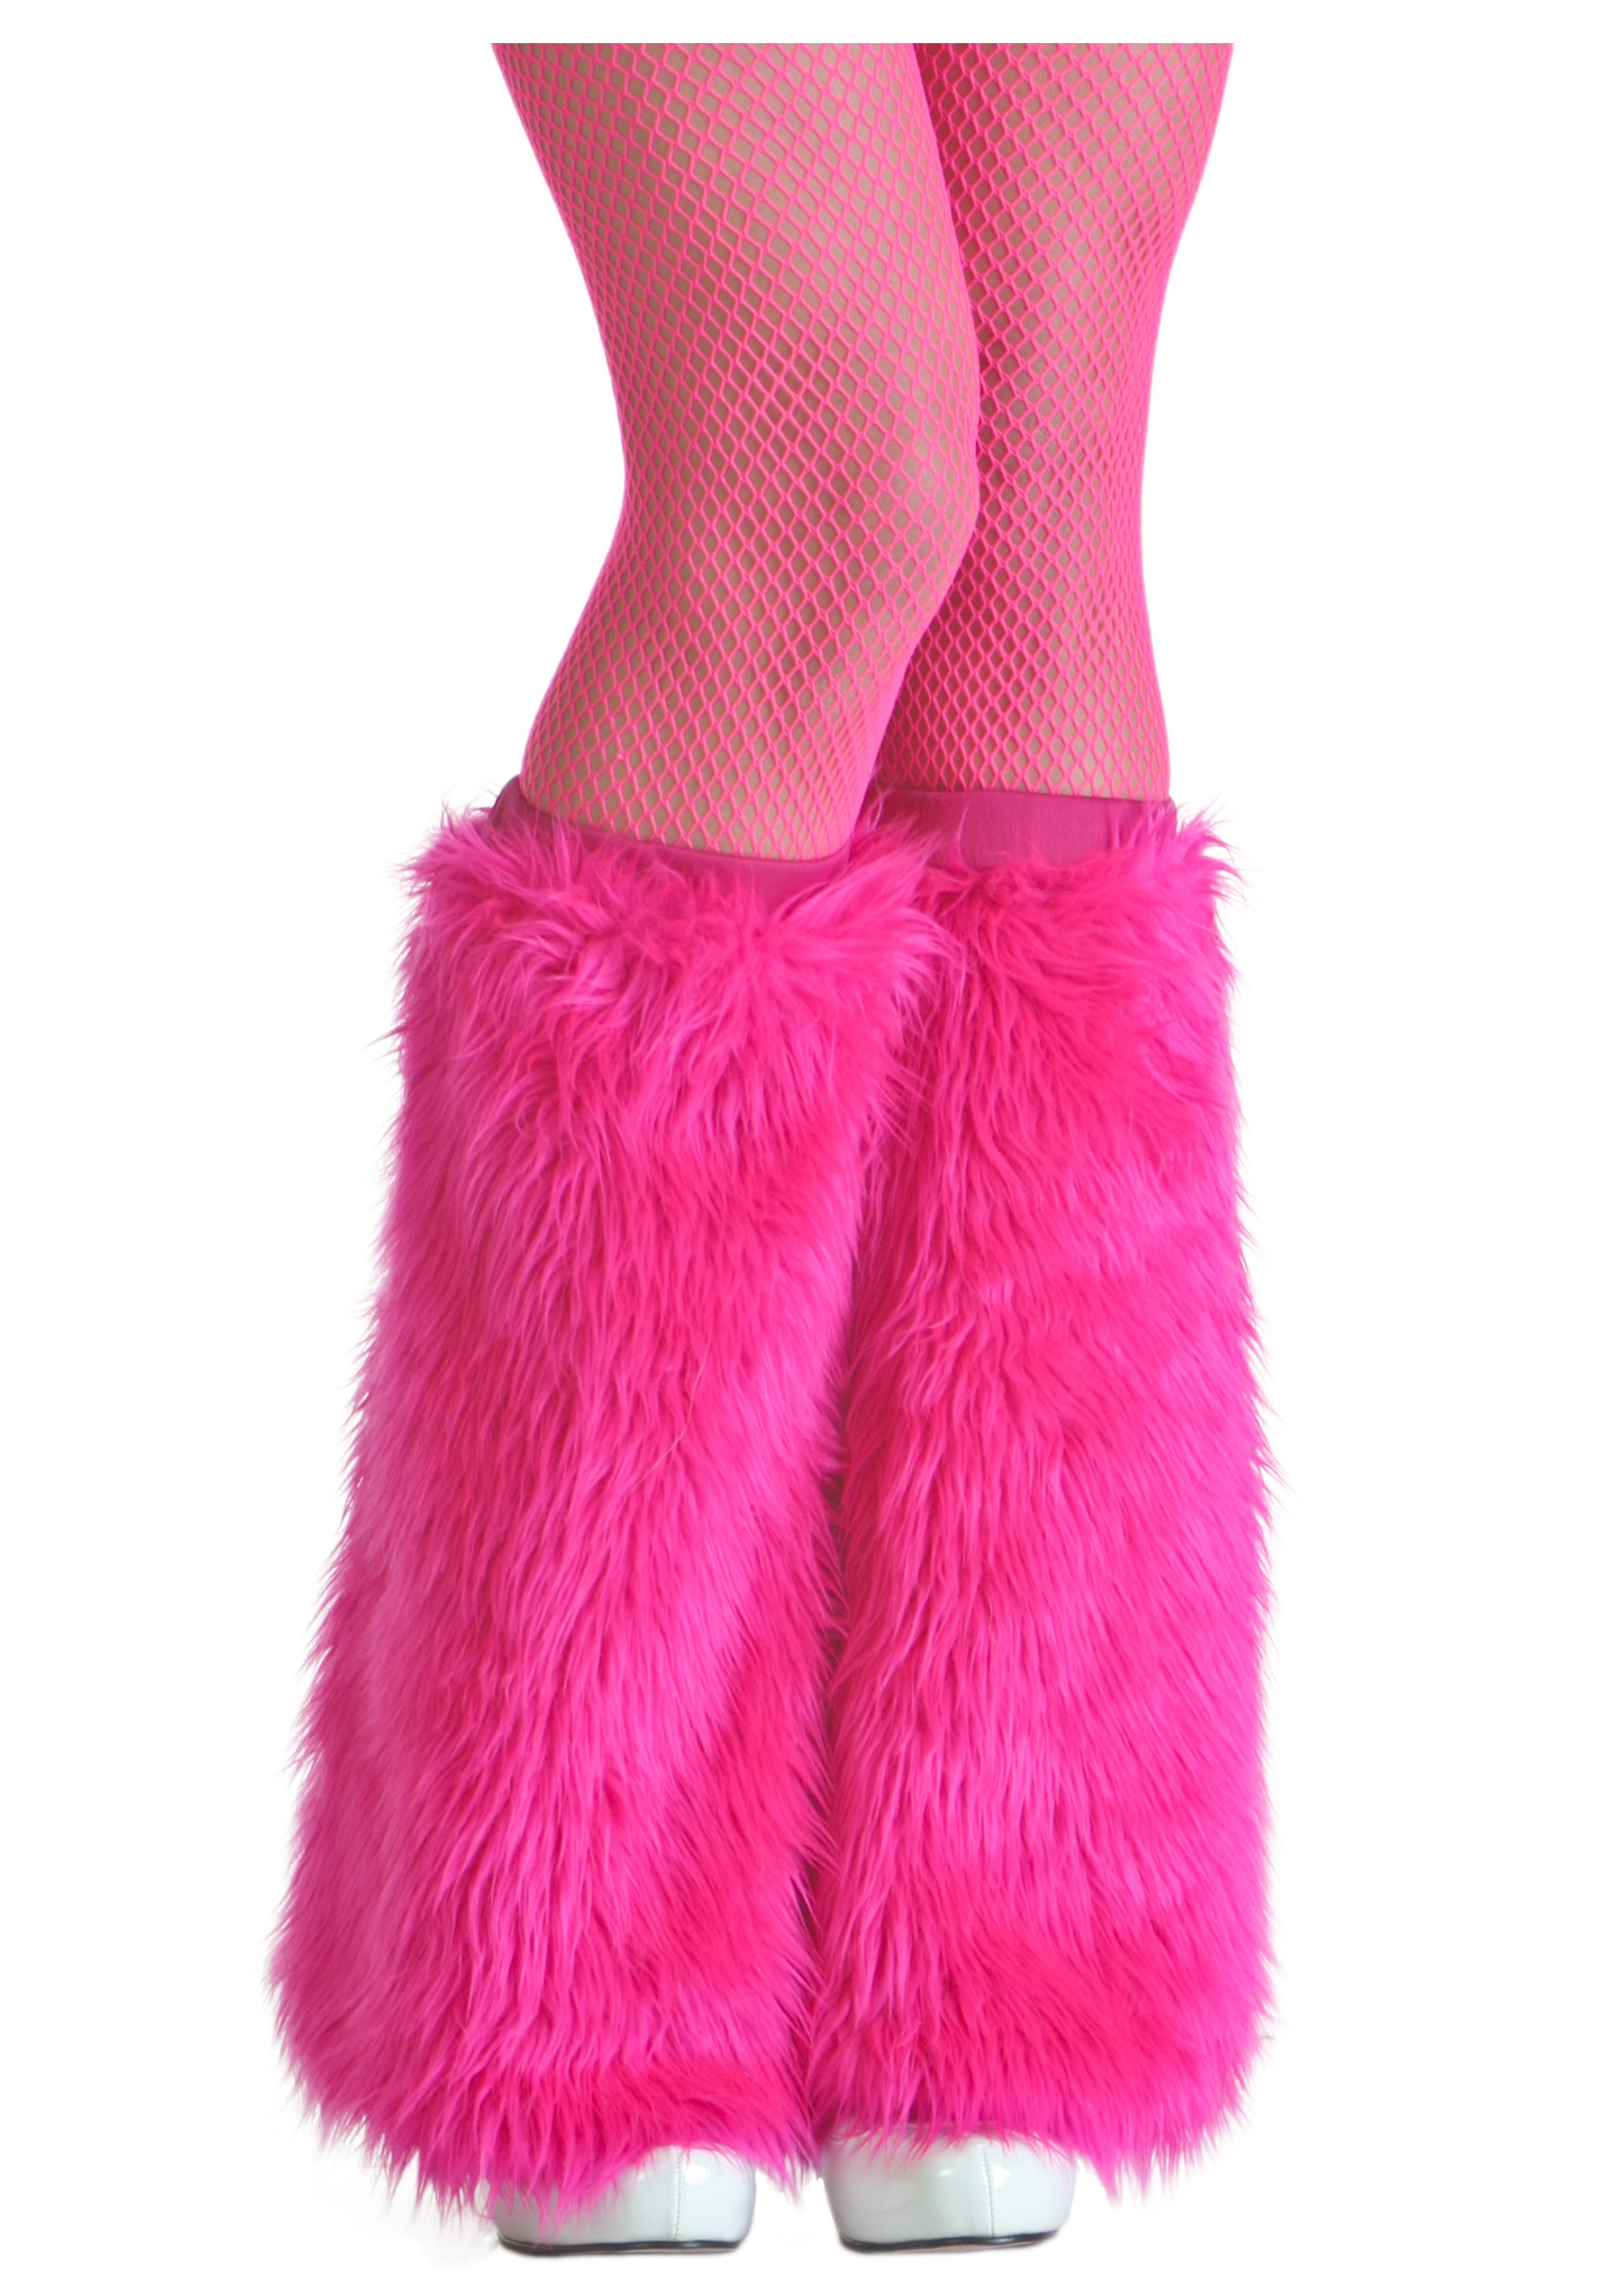 Women's Pink Furry Boot Covers